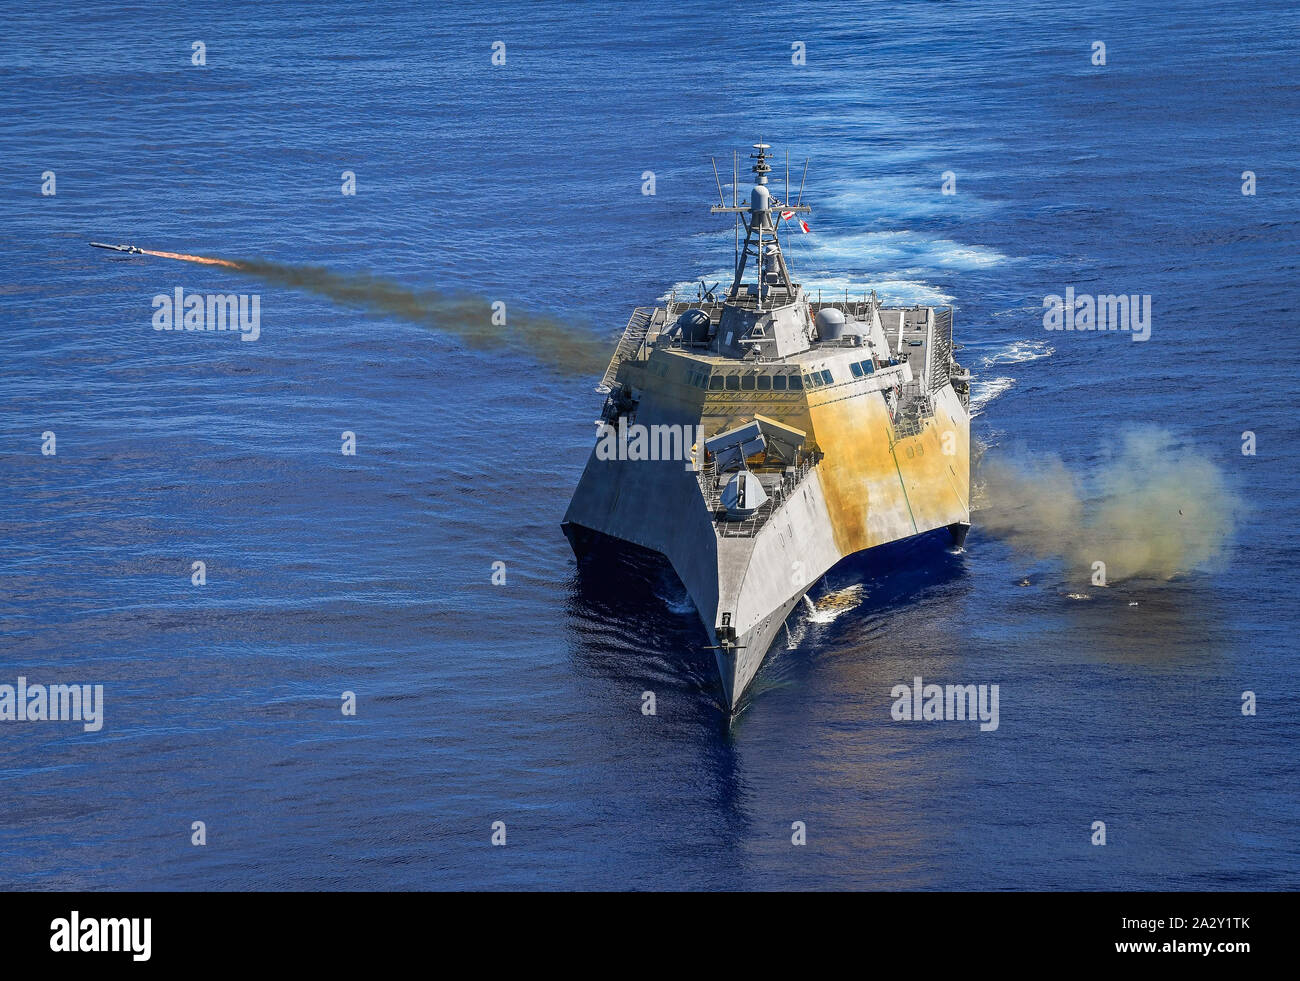 191001-N-FC670-004  PHILIPPINE SEA (Oct. 1, 2019) Independence-variant littoral combat ship USS Gabrielle Giffords (LCS 10) launches a Naval Strike Missile (NSM) during exercise Pacific Griffin. The NSM is a long-range, precision strike weapon that is designed to find and destroy enemy ships. Pacific Griffin is a biennial exercise conducted in the waters near Guam aimed at enhancing combined proficiency at sea while strengthening relationships between the U.S. and Republic of Singapore navies. (U.S. Navy photo by Chief Mass Communication Specialist Shannon Renfroe/Released) Stock Photo